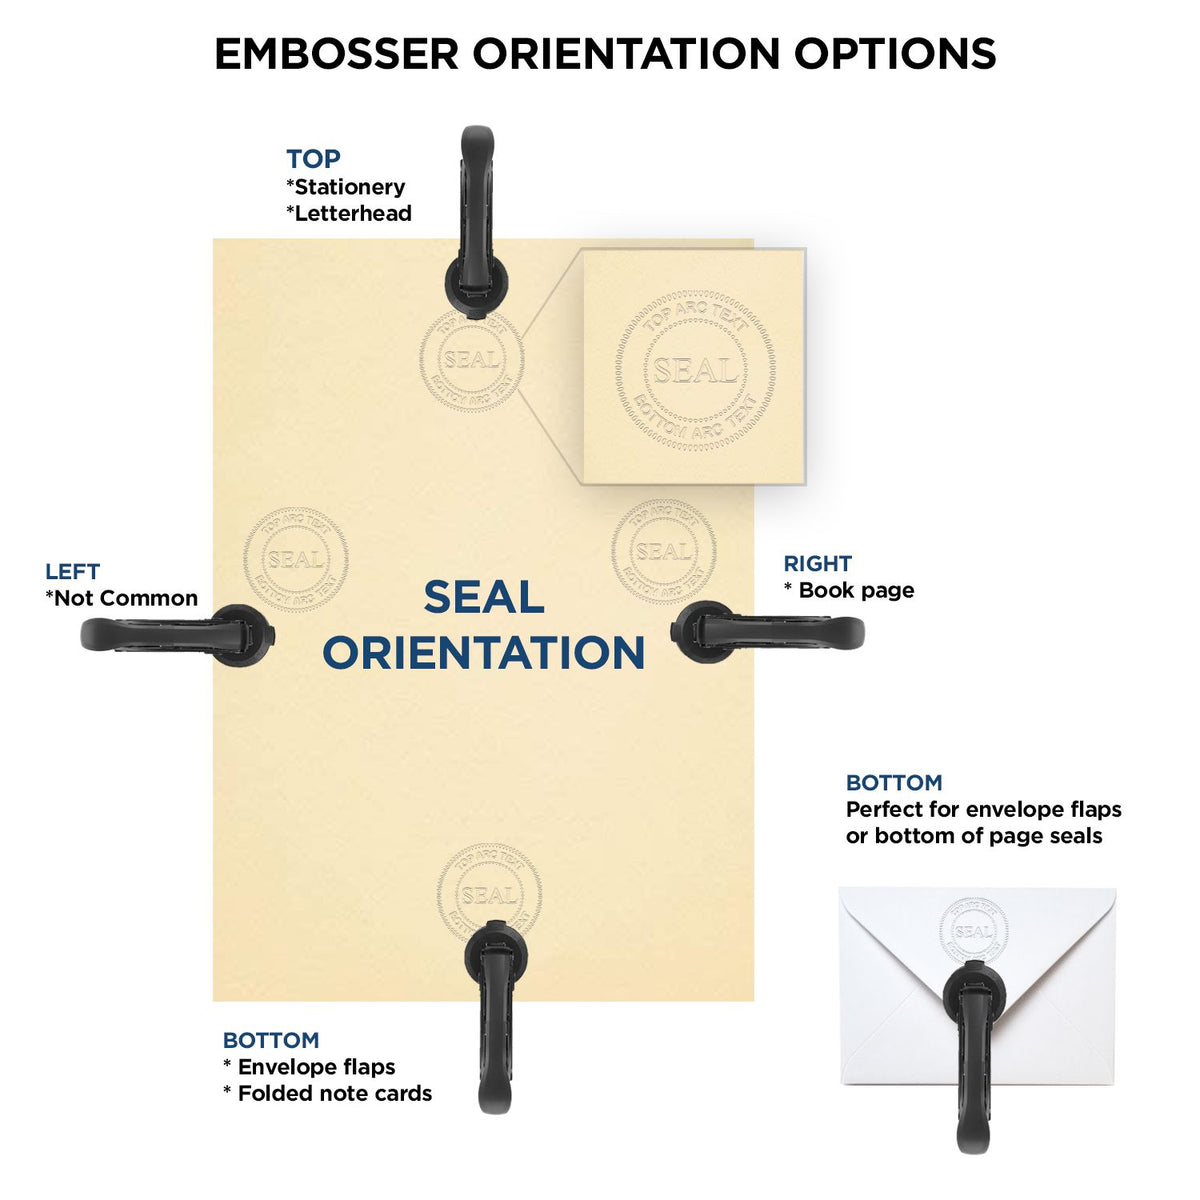 An infographic for the Heavy Duty Cast Iron Massachusetts Engineer Seal Embosser showing embosser orientation, this is showing examples of a top, bottom, right and left insert.